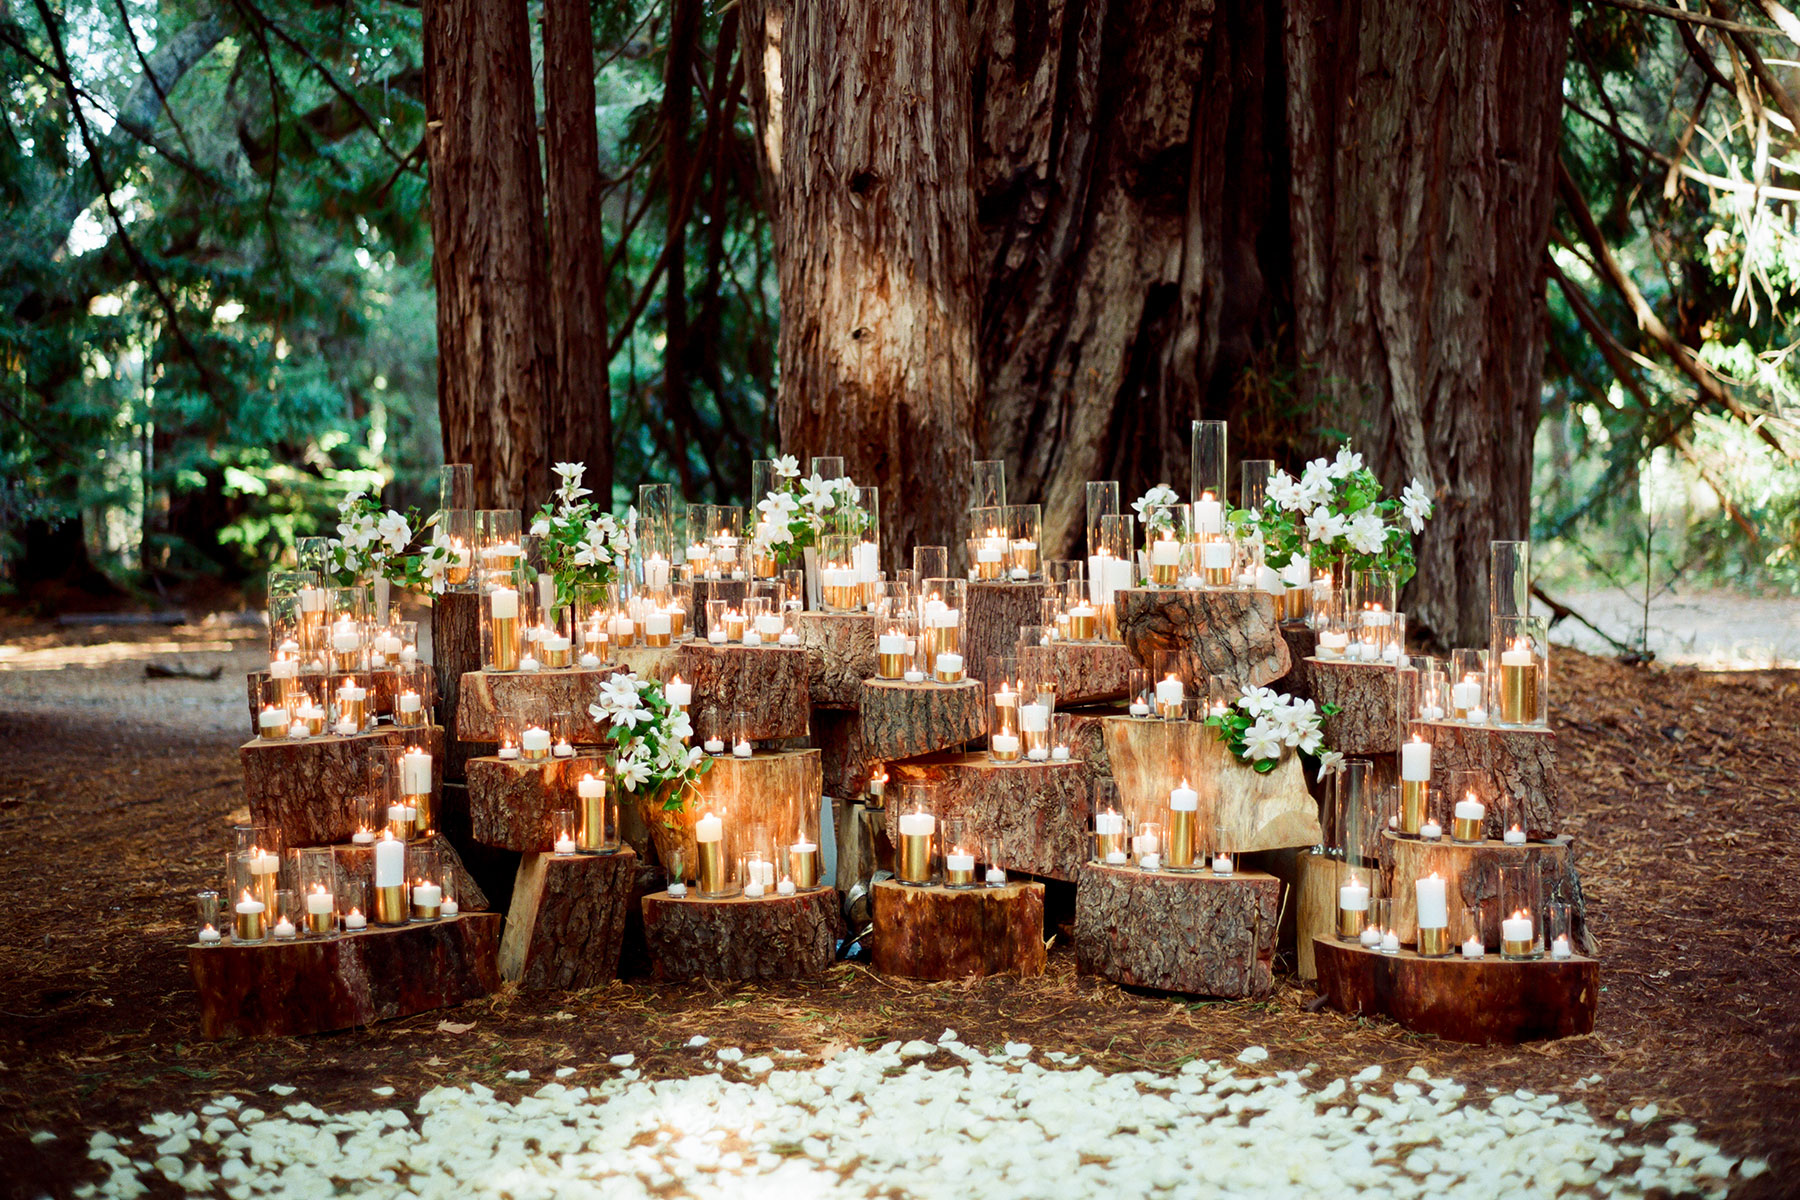 Rustic Wedding Ceremony on the Woods with Candle Backdrop and White Petals on the Floor // 15 Stunning Ways to Decorate with Candles // https://mysweetengagement.com